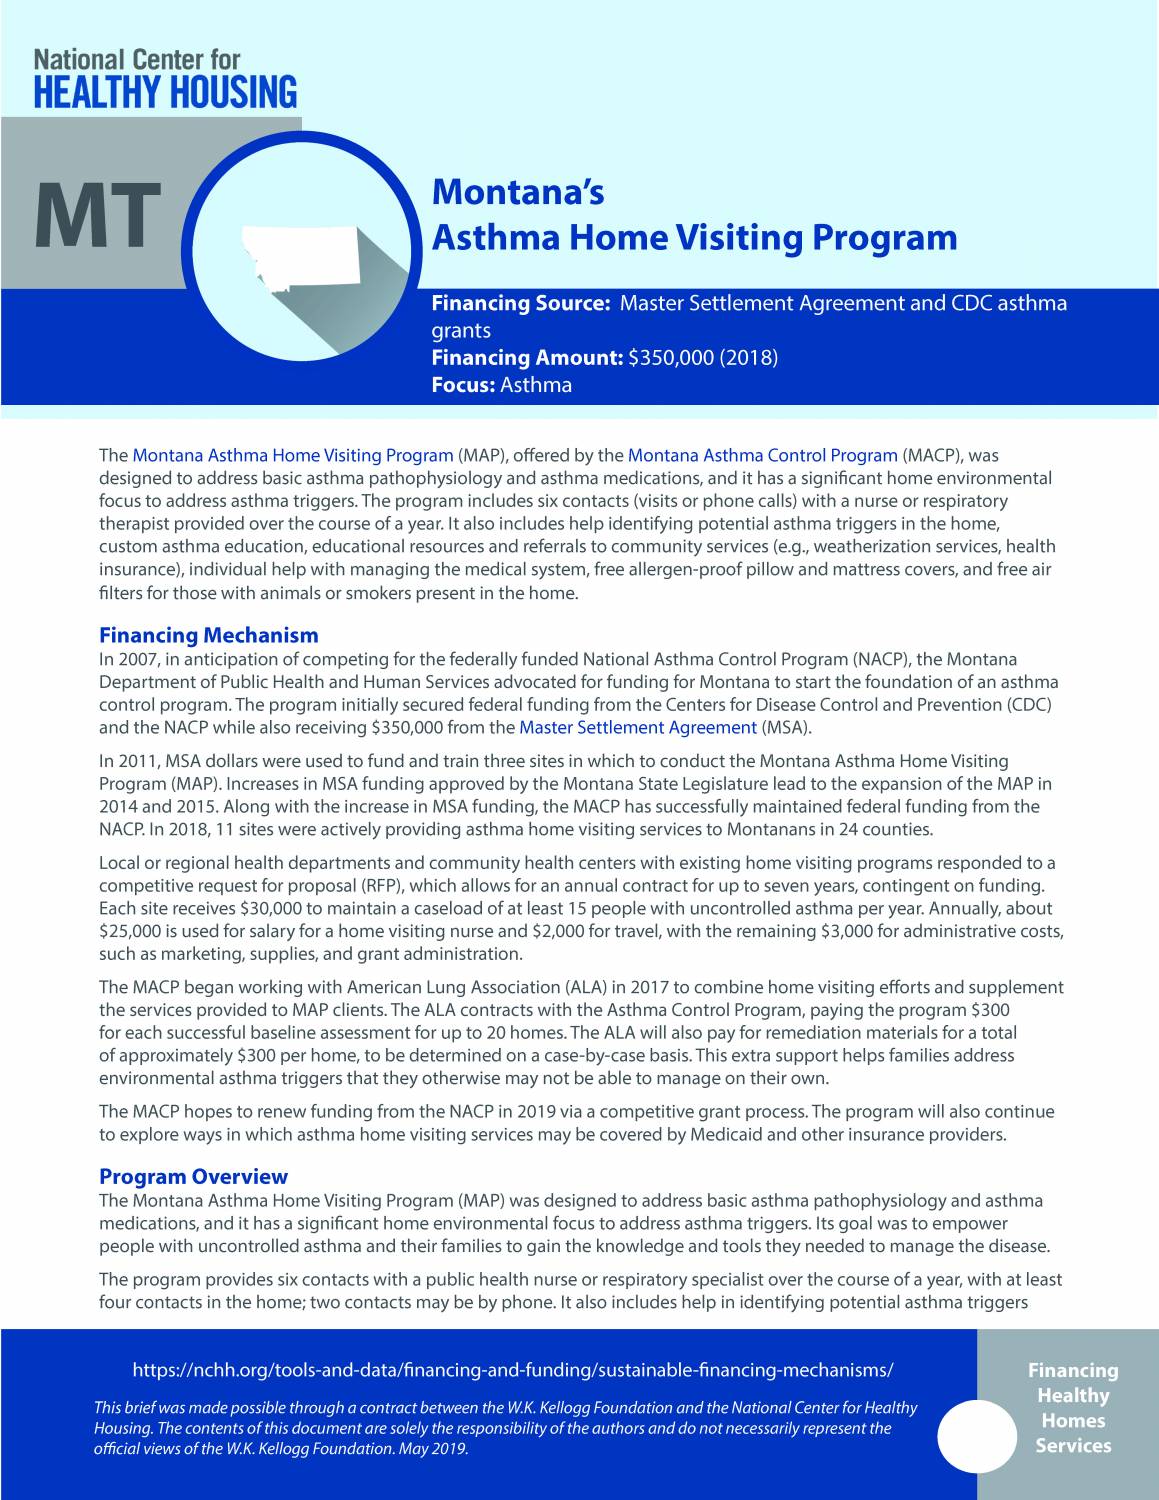 Sustainable Financing Mechanisms: Montana's Asthma Home Visiting Program